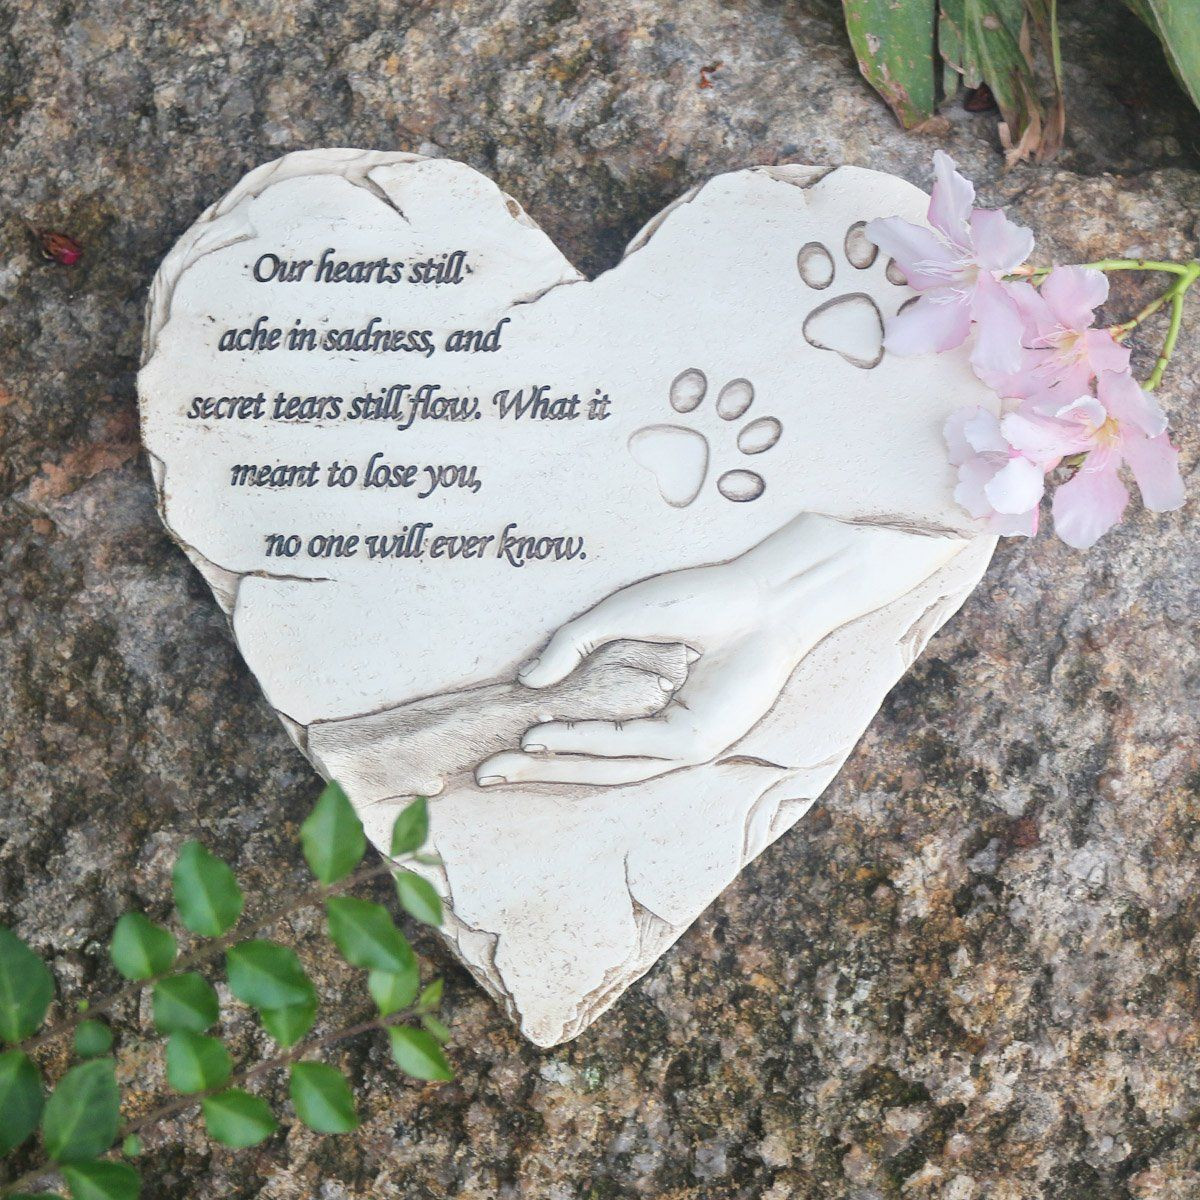 19 Perfect Personalised Grave Vase 2024 free download personalised grave vase of dog memorial stones handprinted heart shaped pet memorial gifts for dog memorial stones handprinted heart shaped pet memorial gifts embellished with sympathy poem 